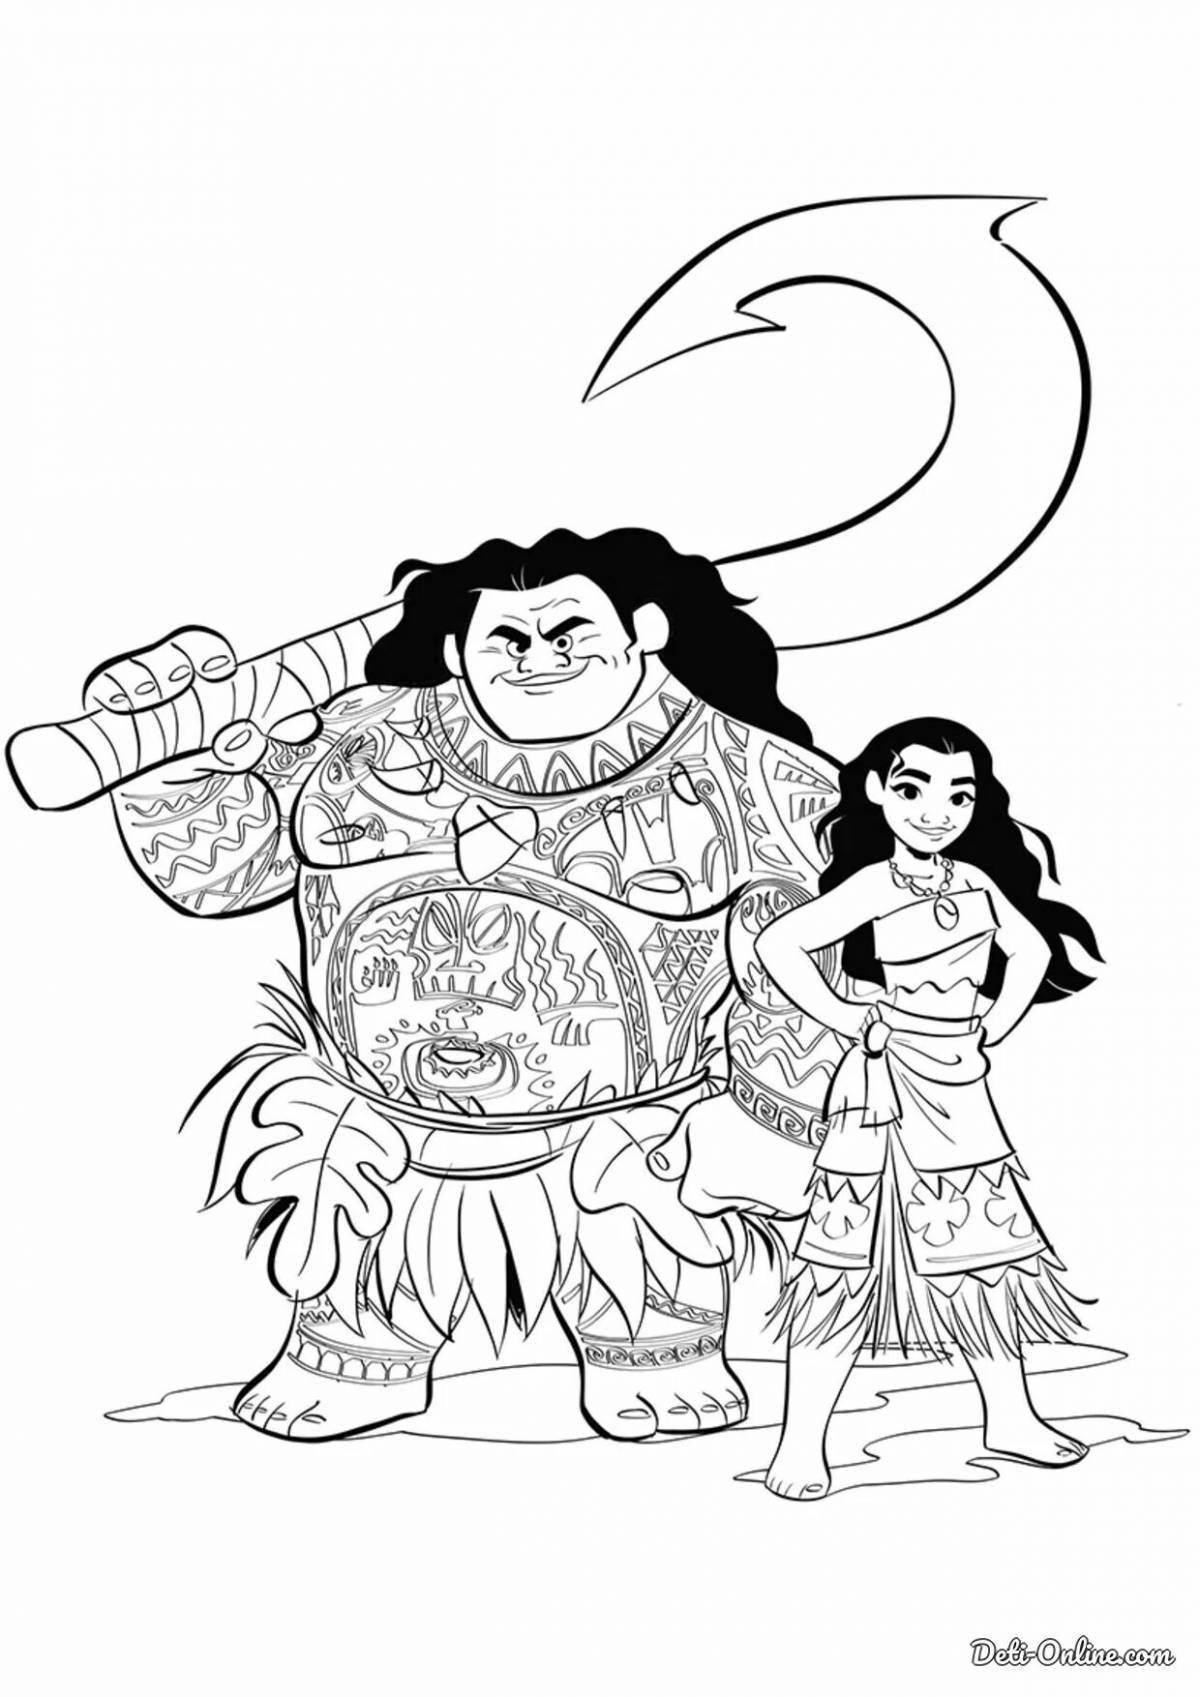 Creative moana coloring book for kids